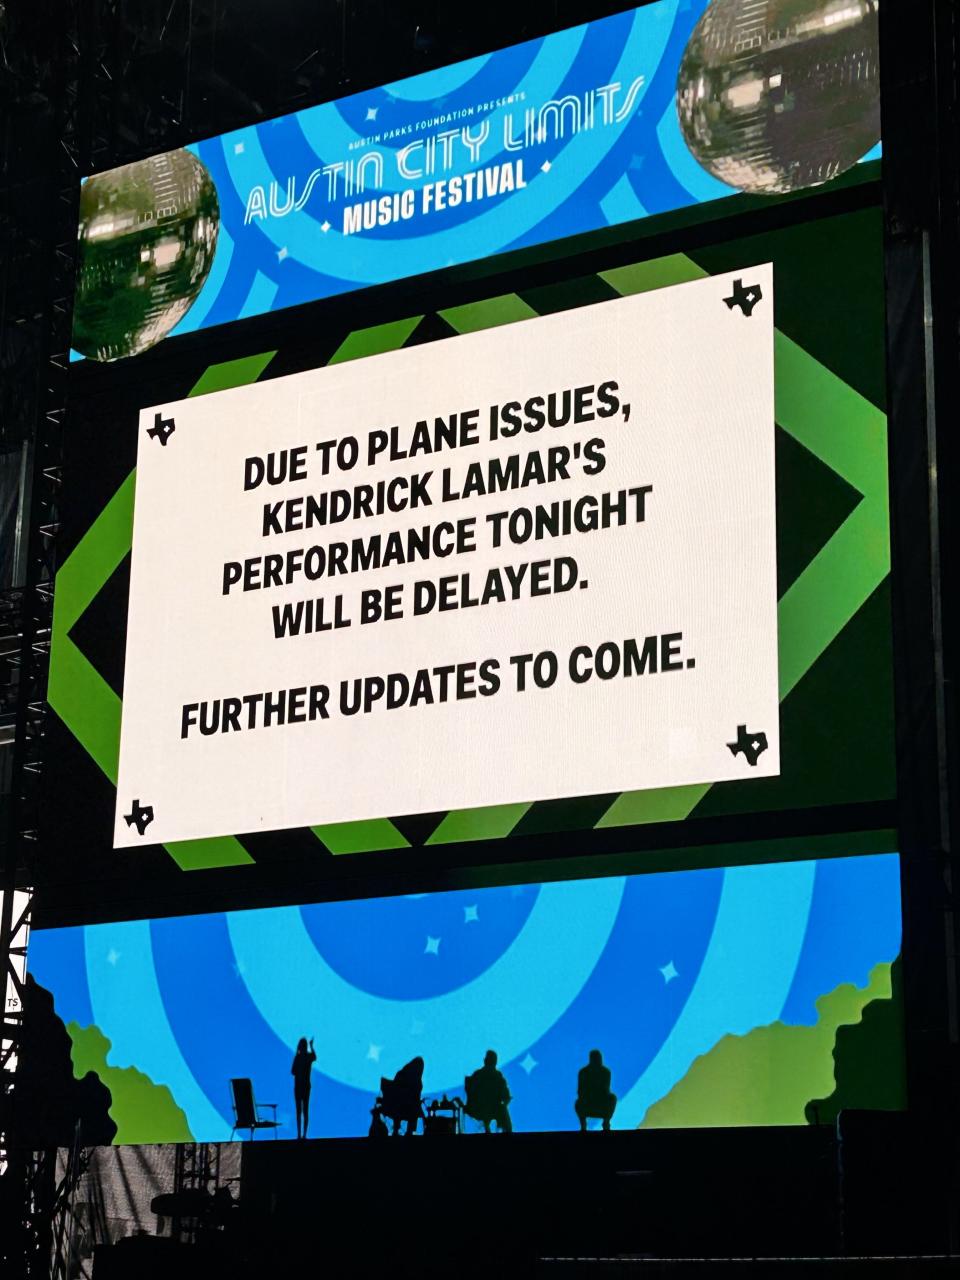 ACL Fest producers flashed this message on the American Express stage screens.